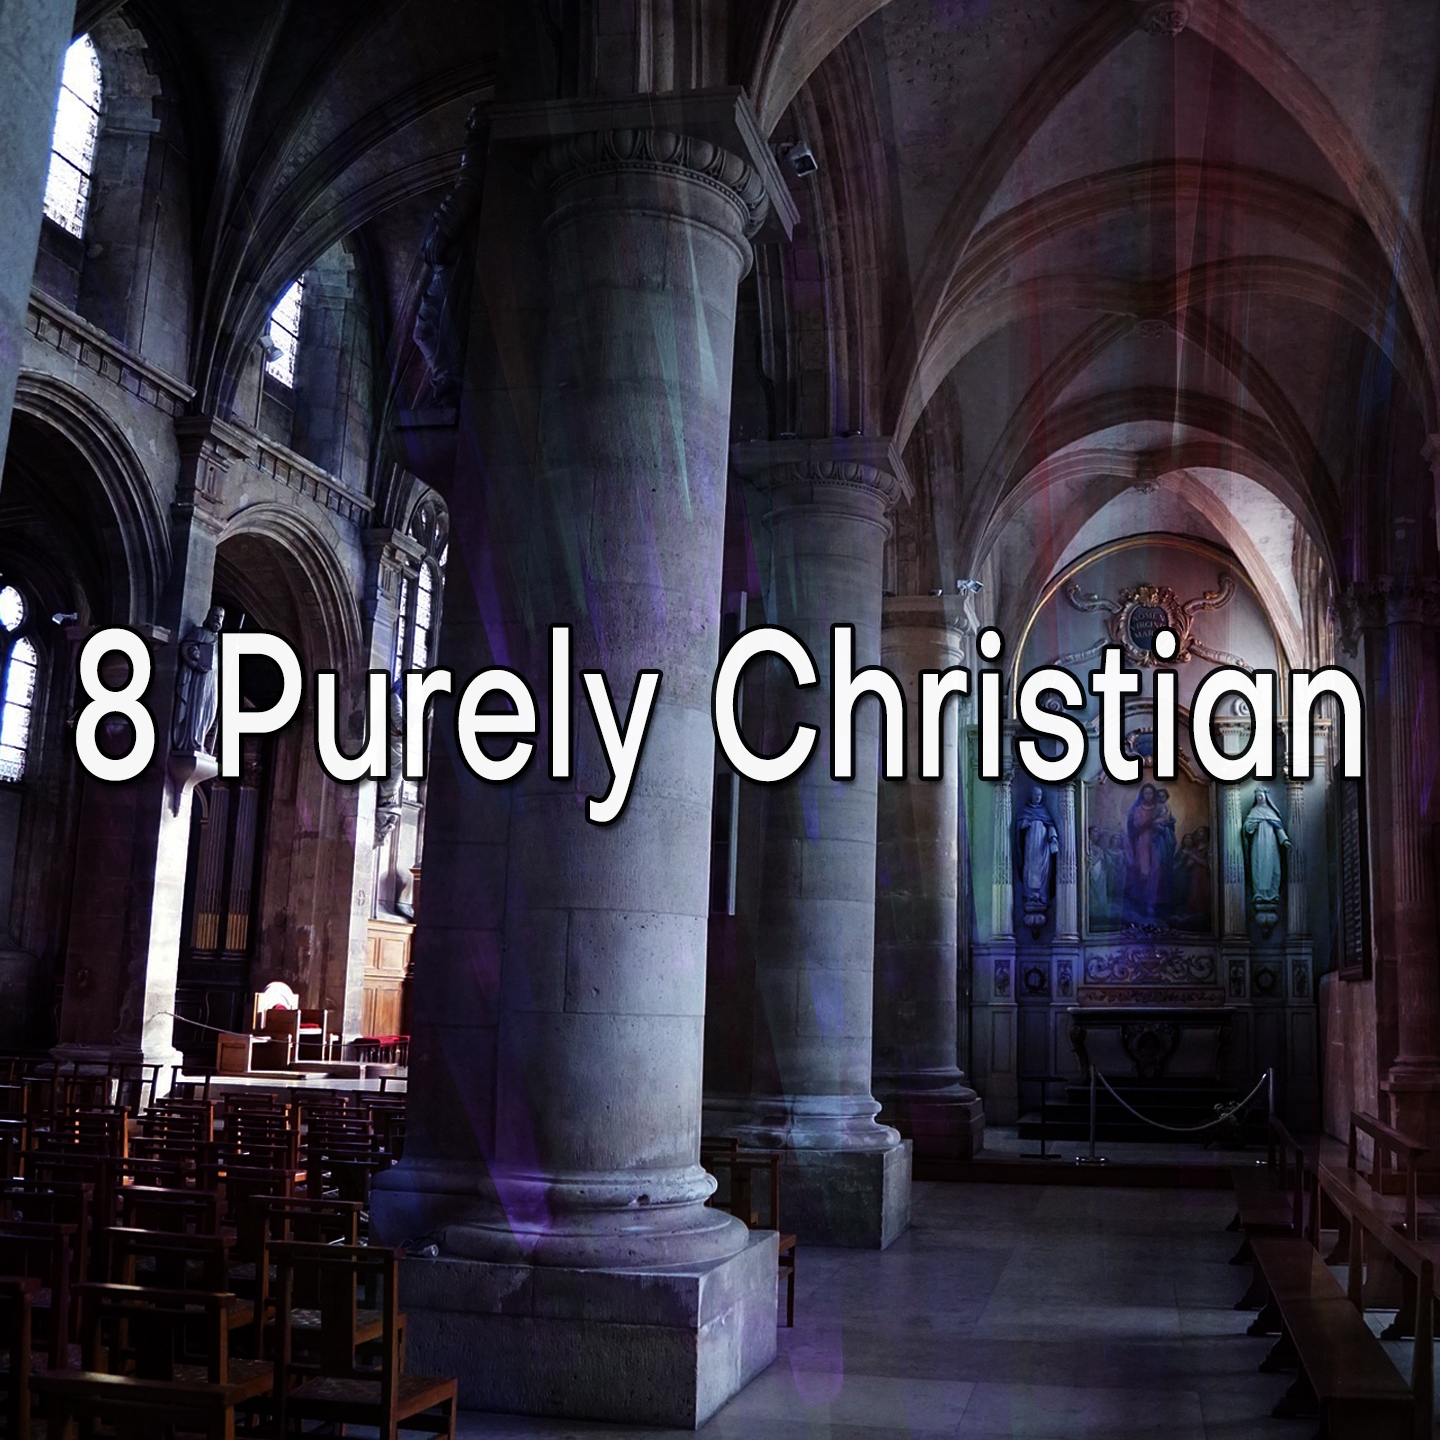 8 Purely Christian